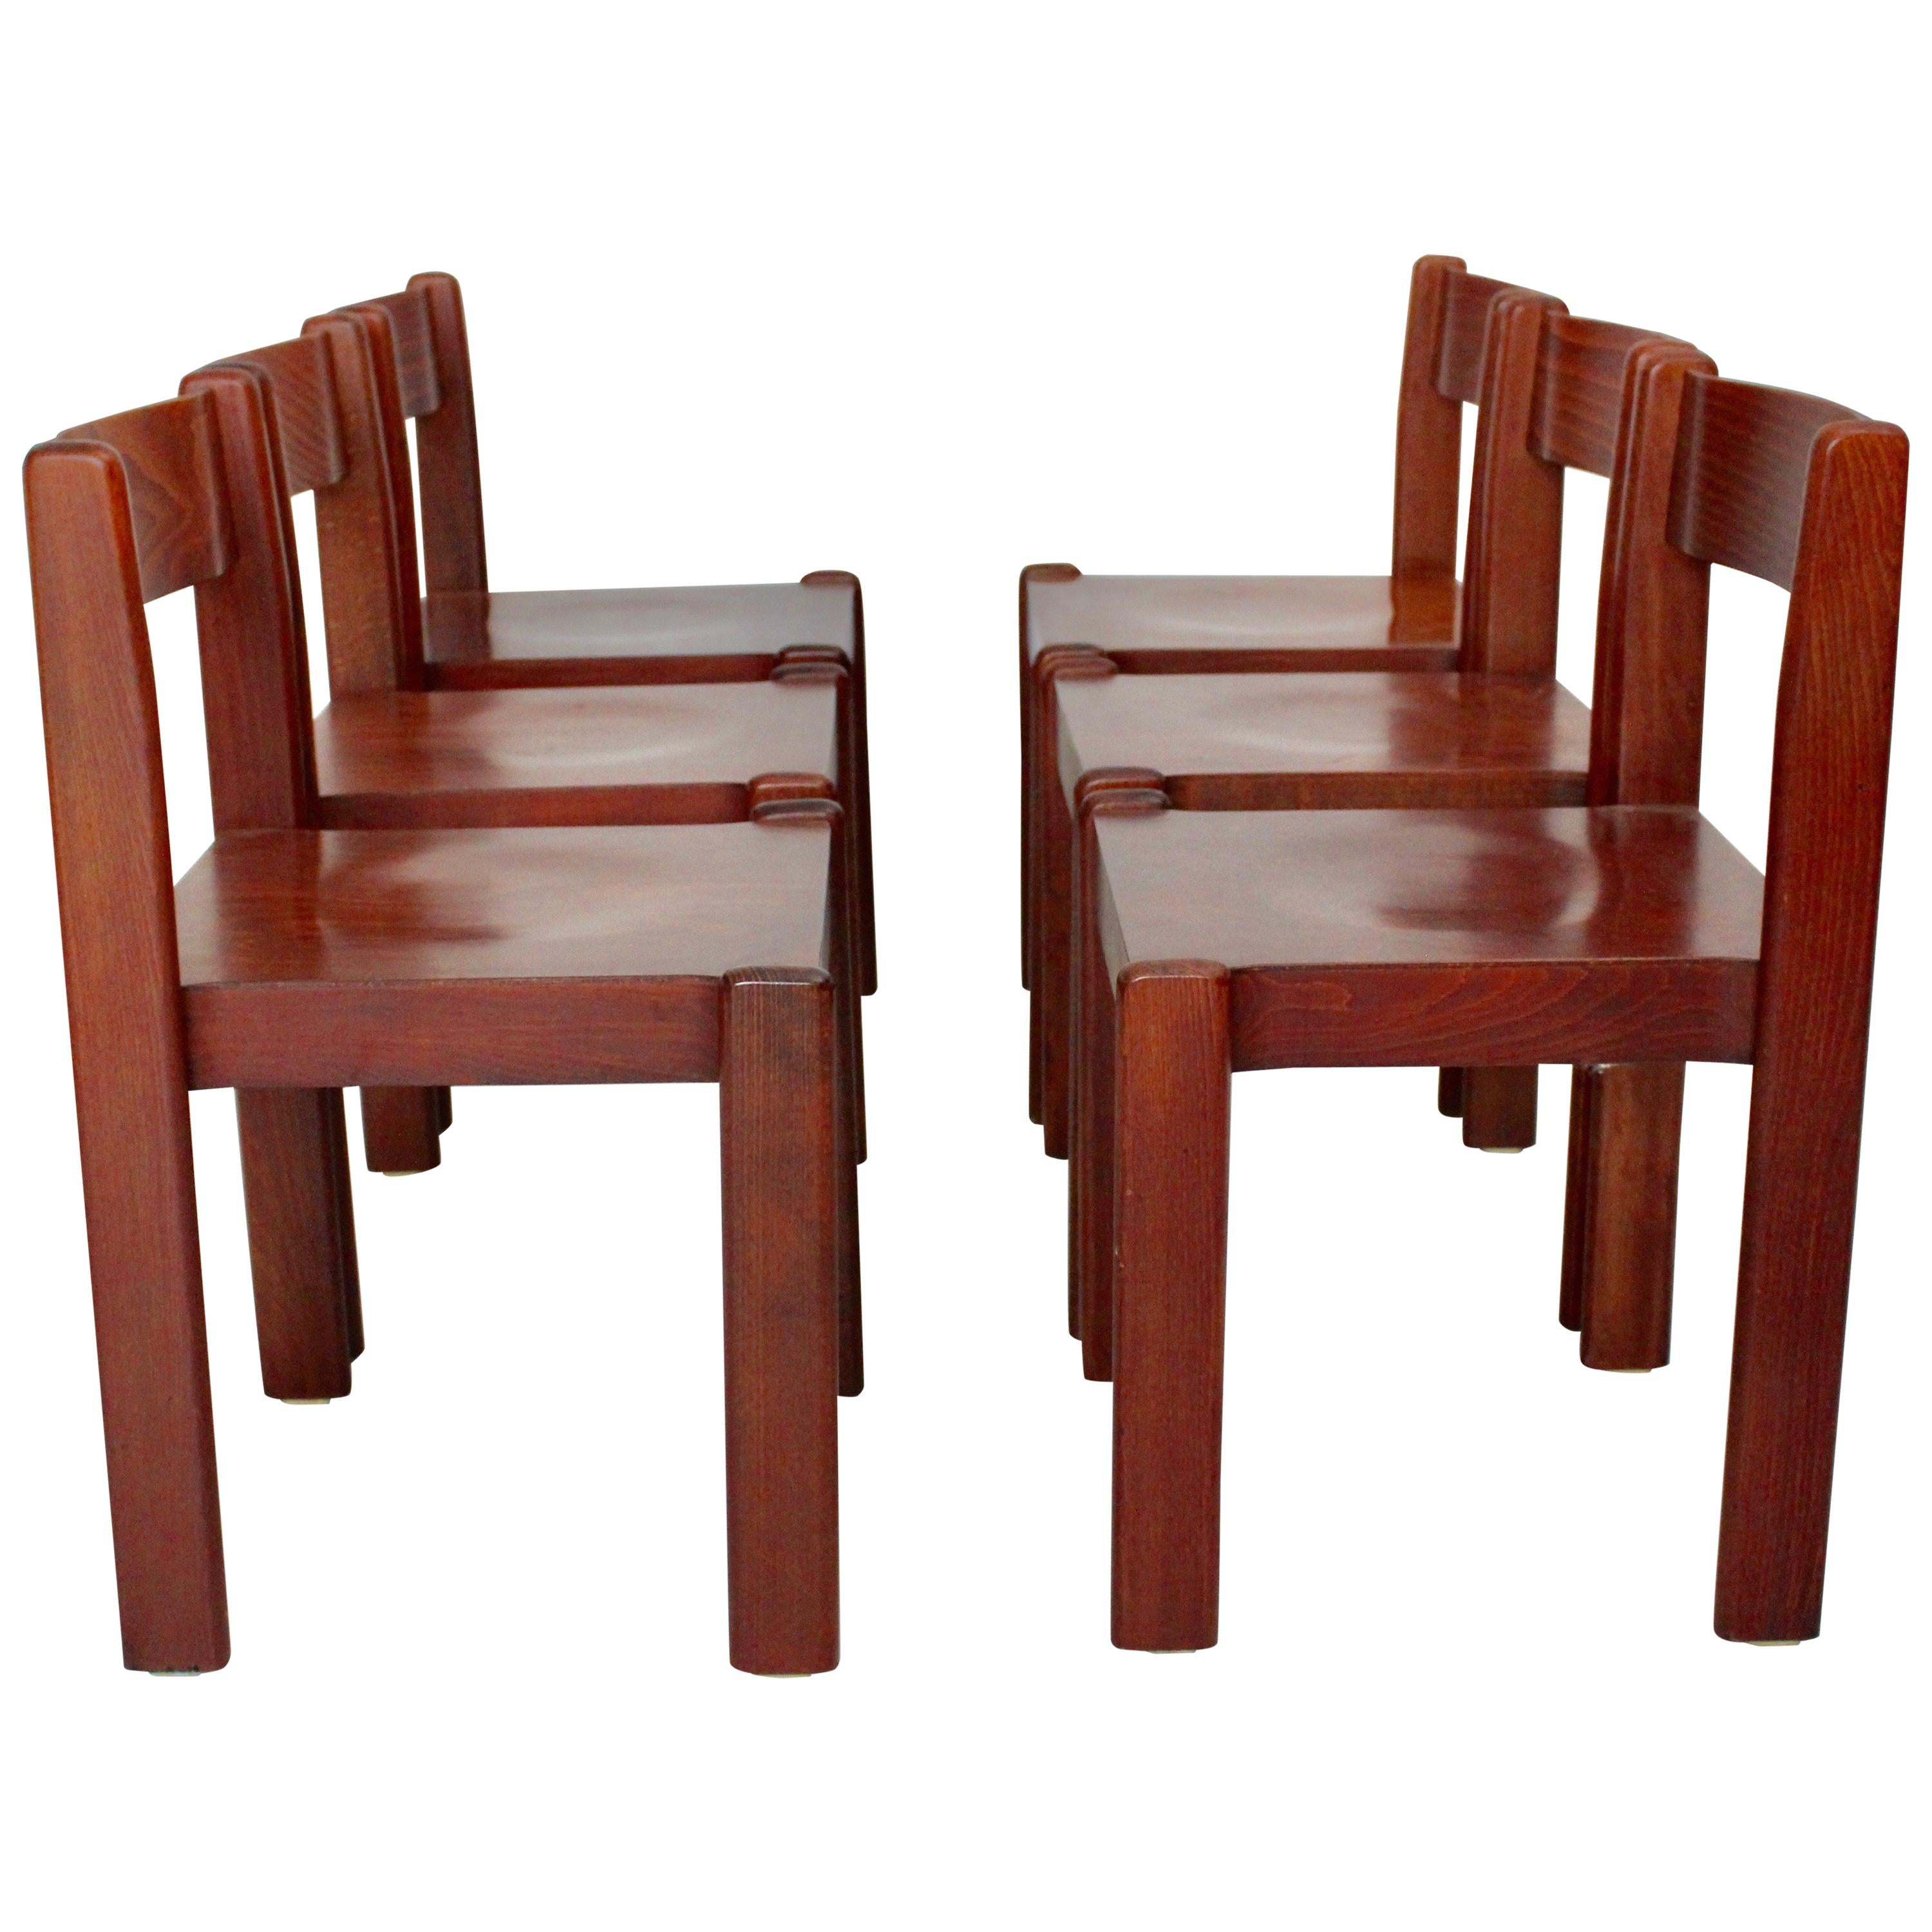 Brown Vintage Dining Room Chairs Mid-Century Modern Set of Six, Italy, 1970